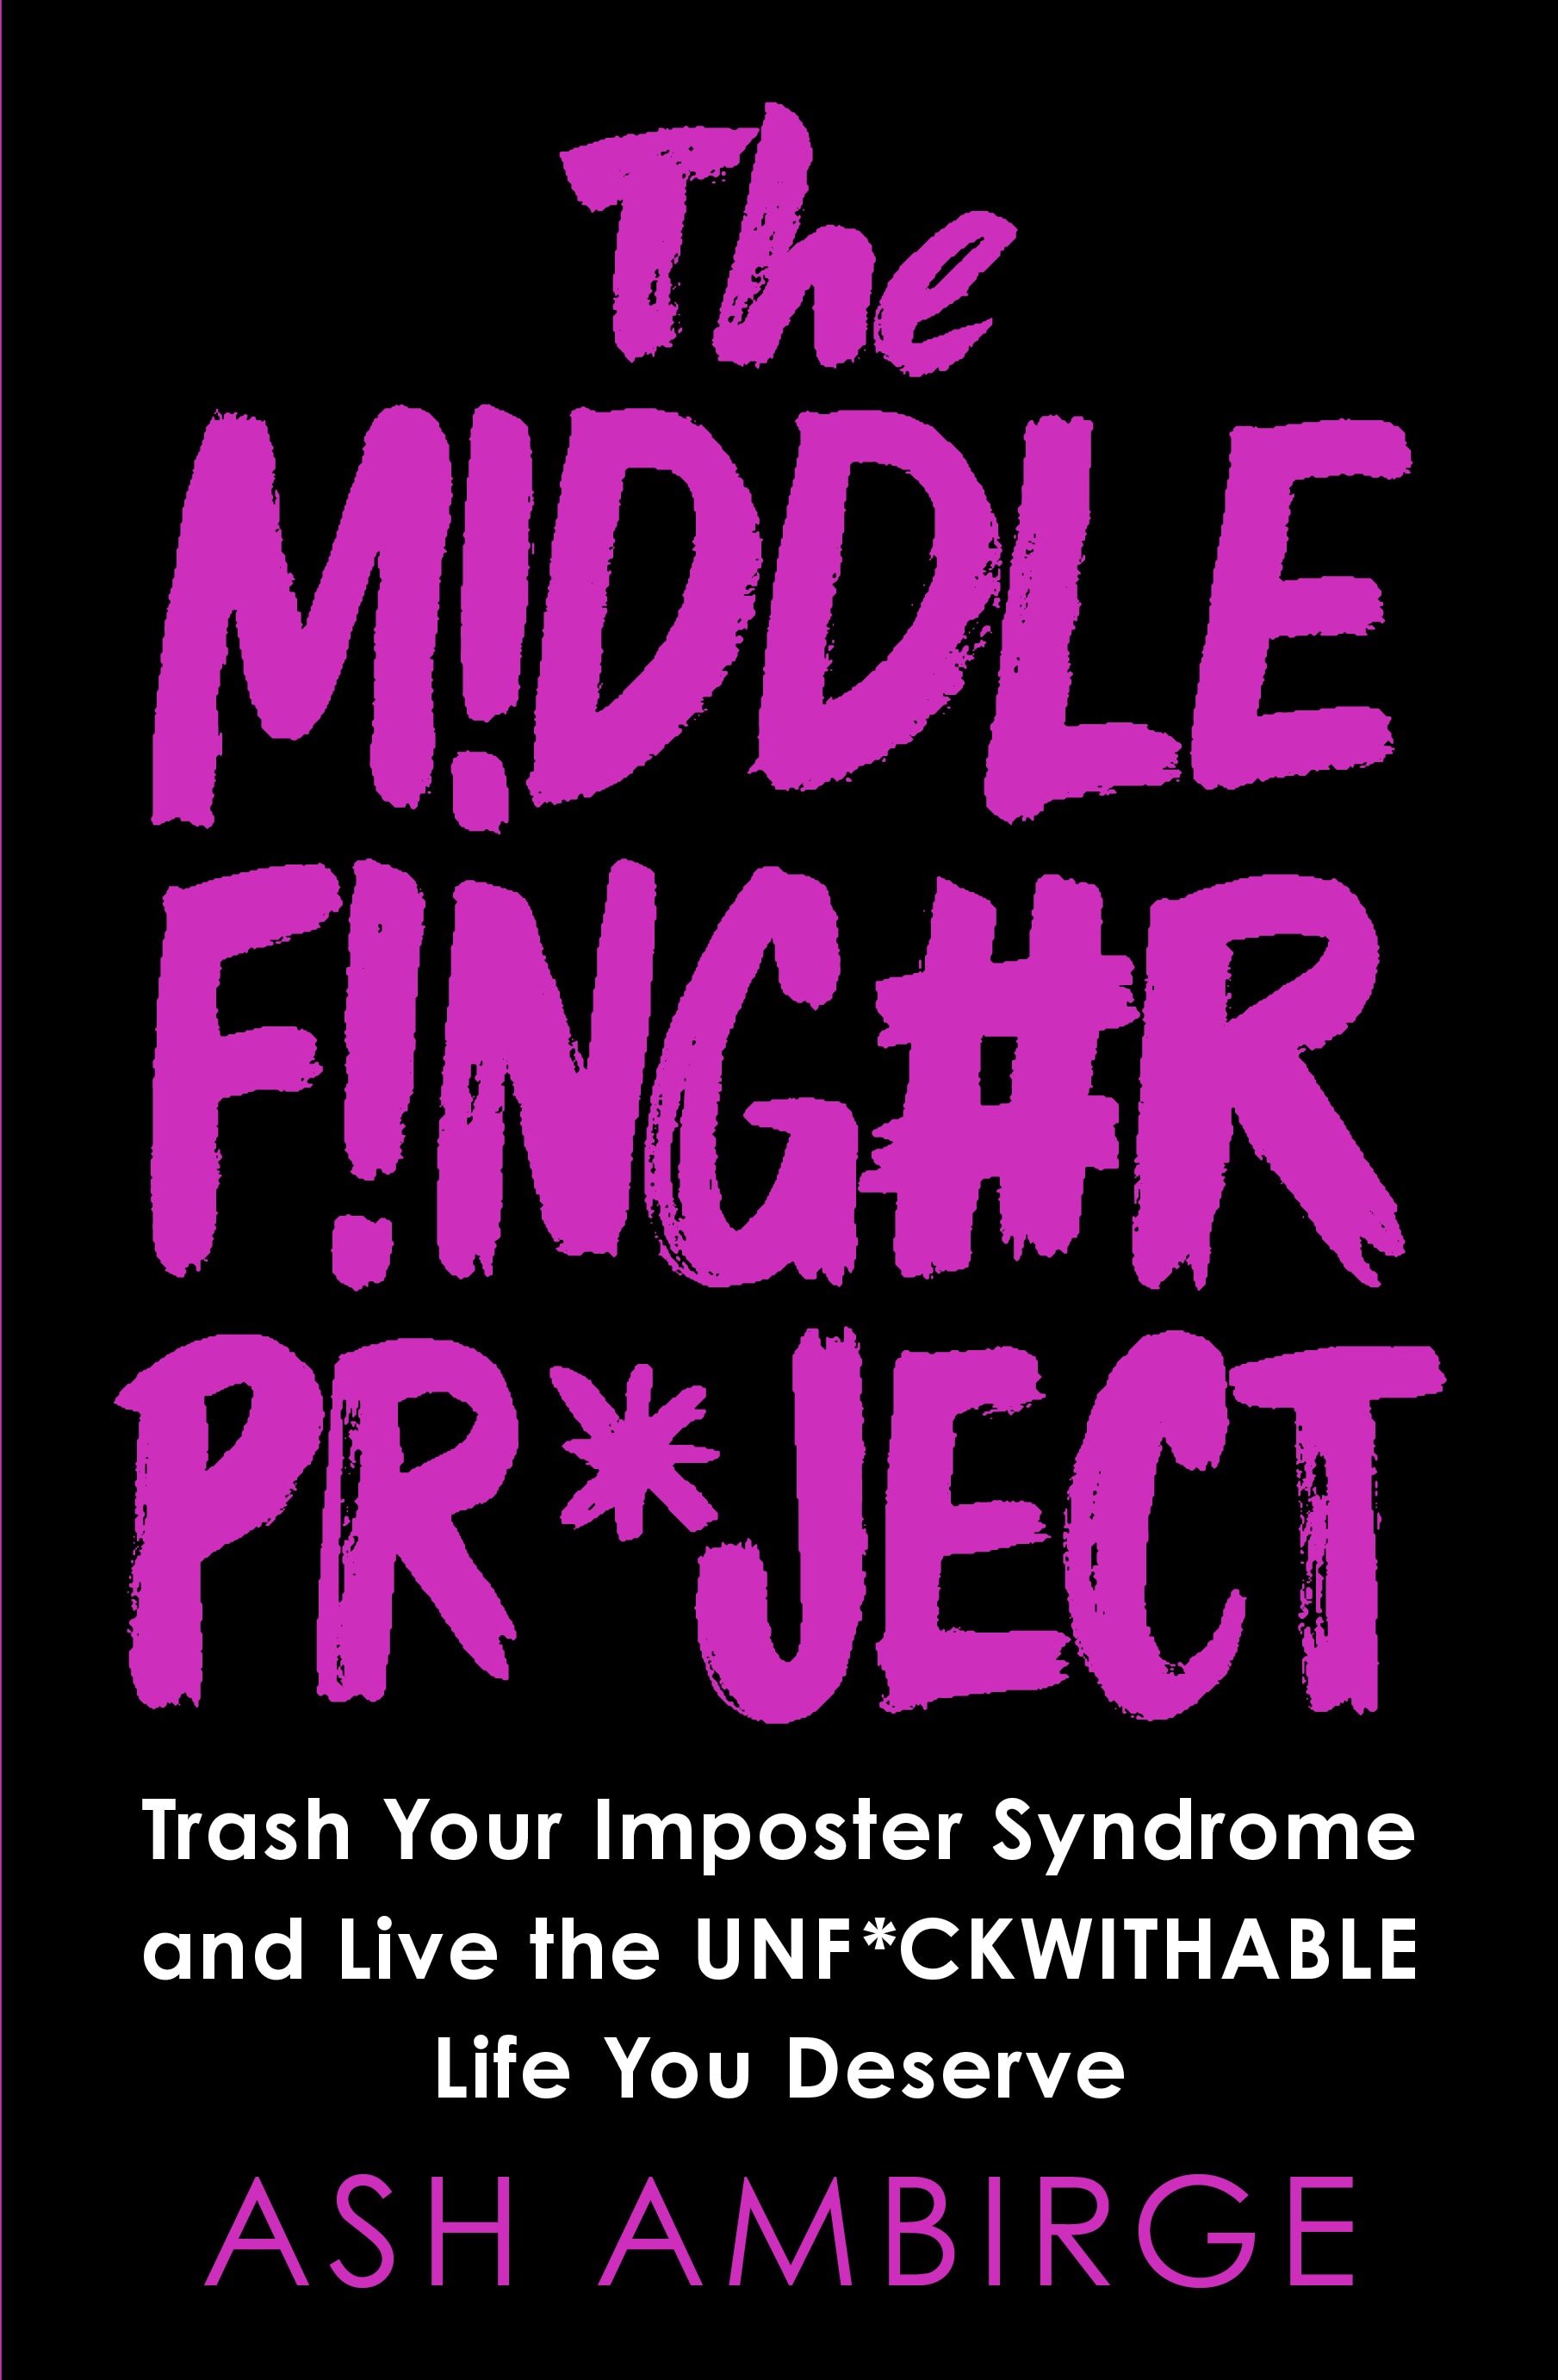 Book “The Middle Finger Project” by Ash Ambirge — February 13, 2020